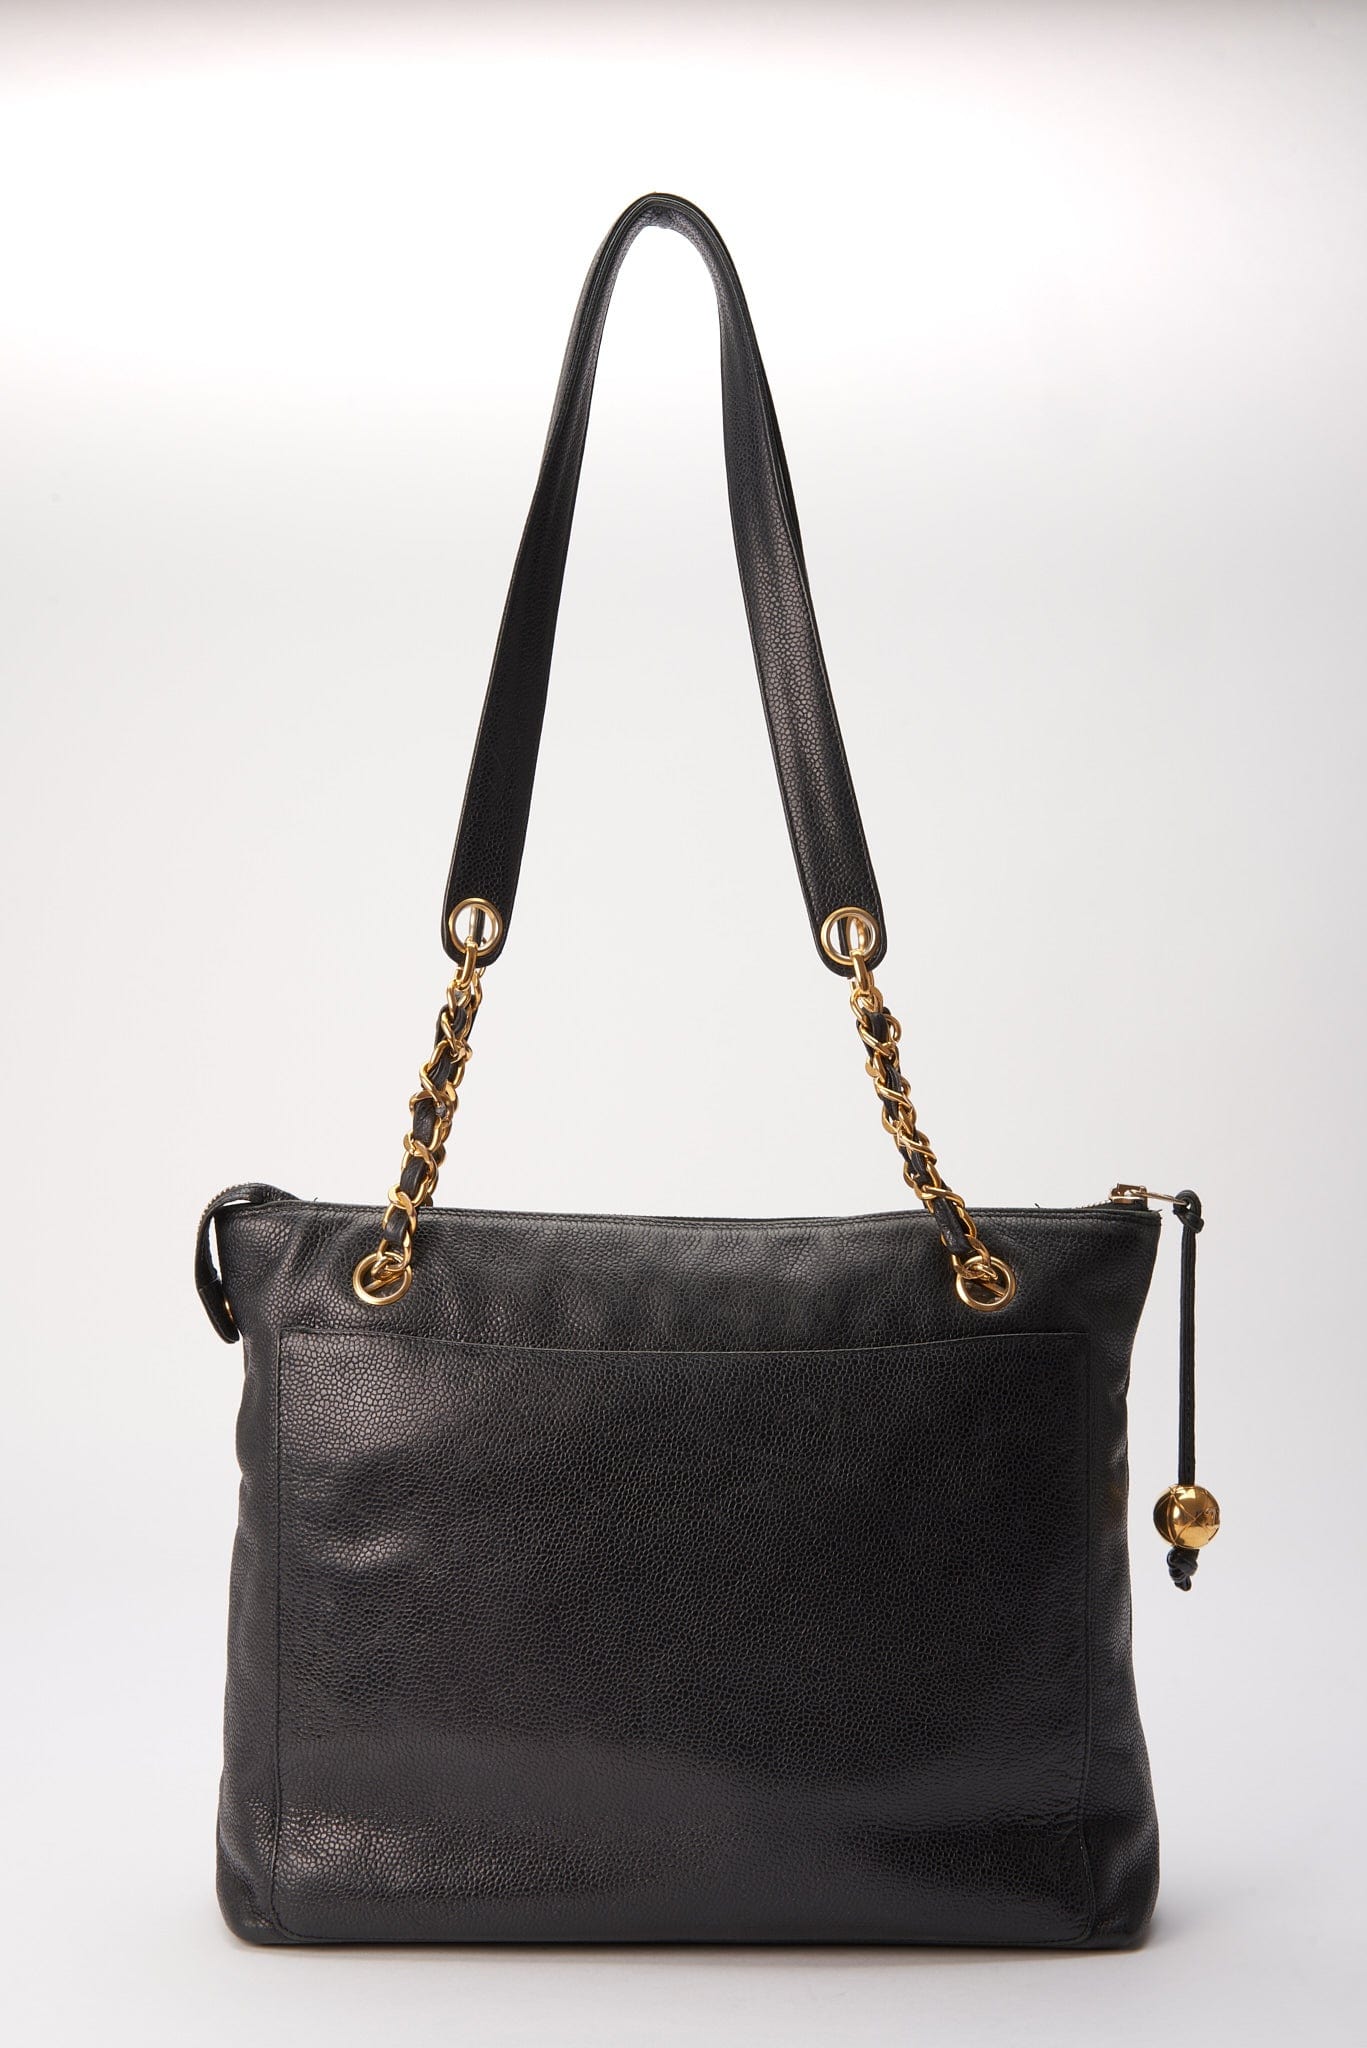 Vintage Chanel Black Leather Tote Bag with 24K Gold Plated Hardware – The  Hosta